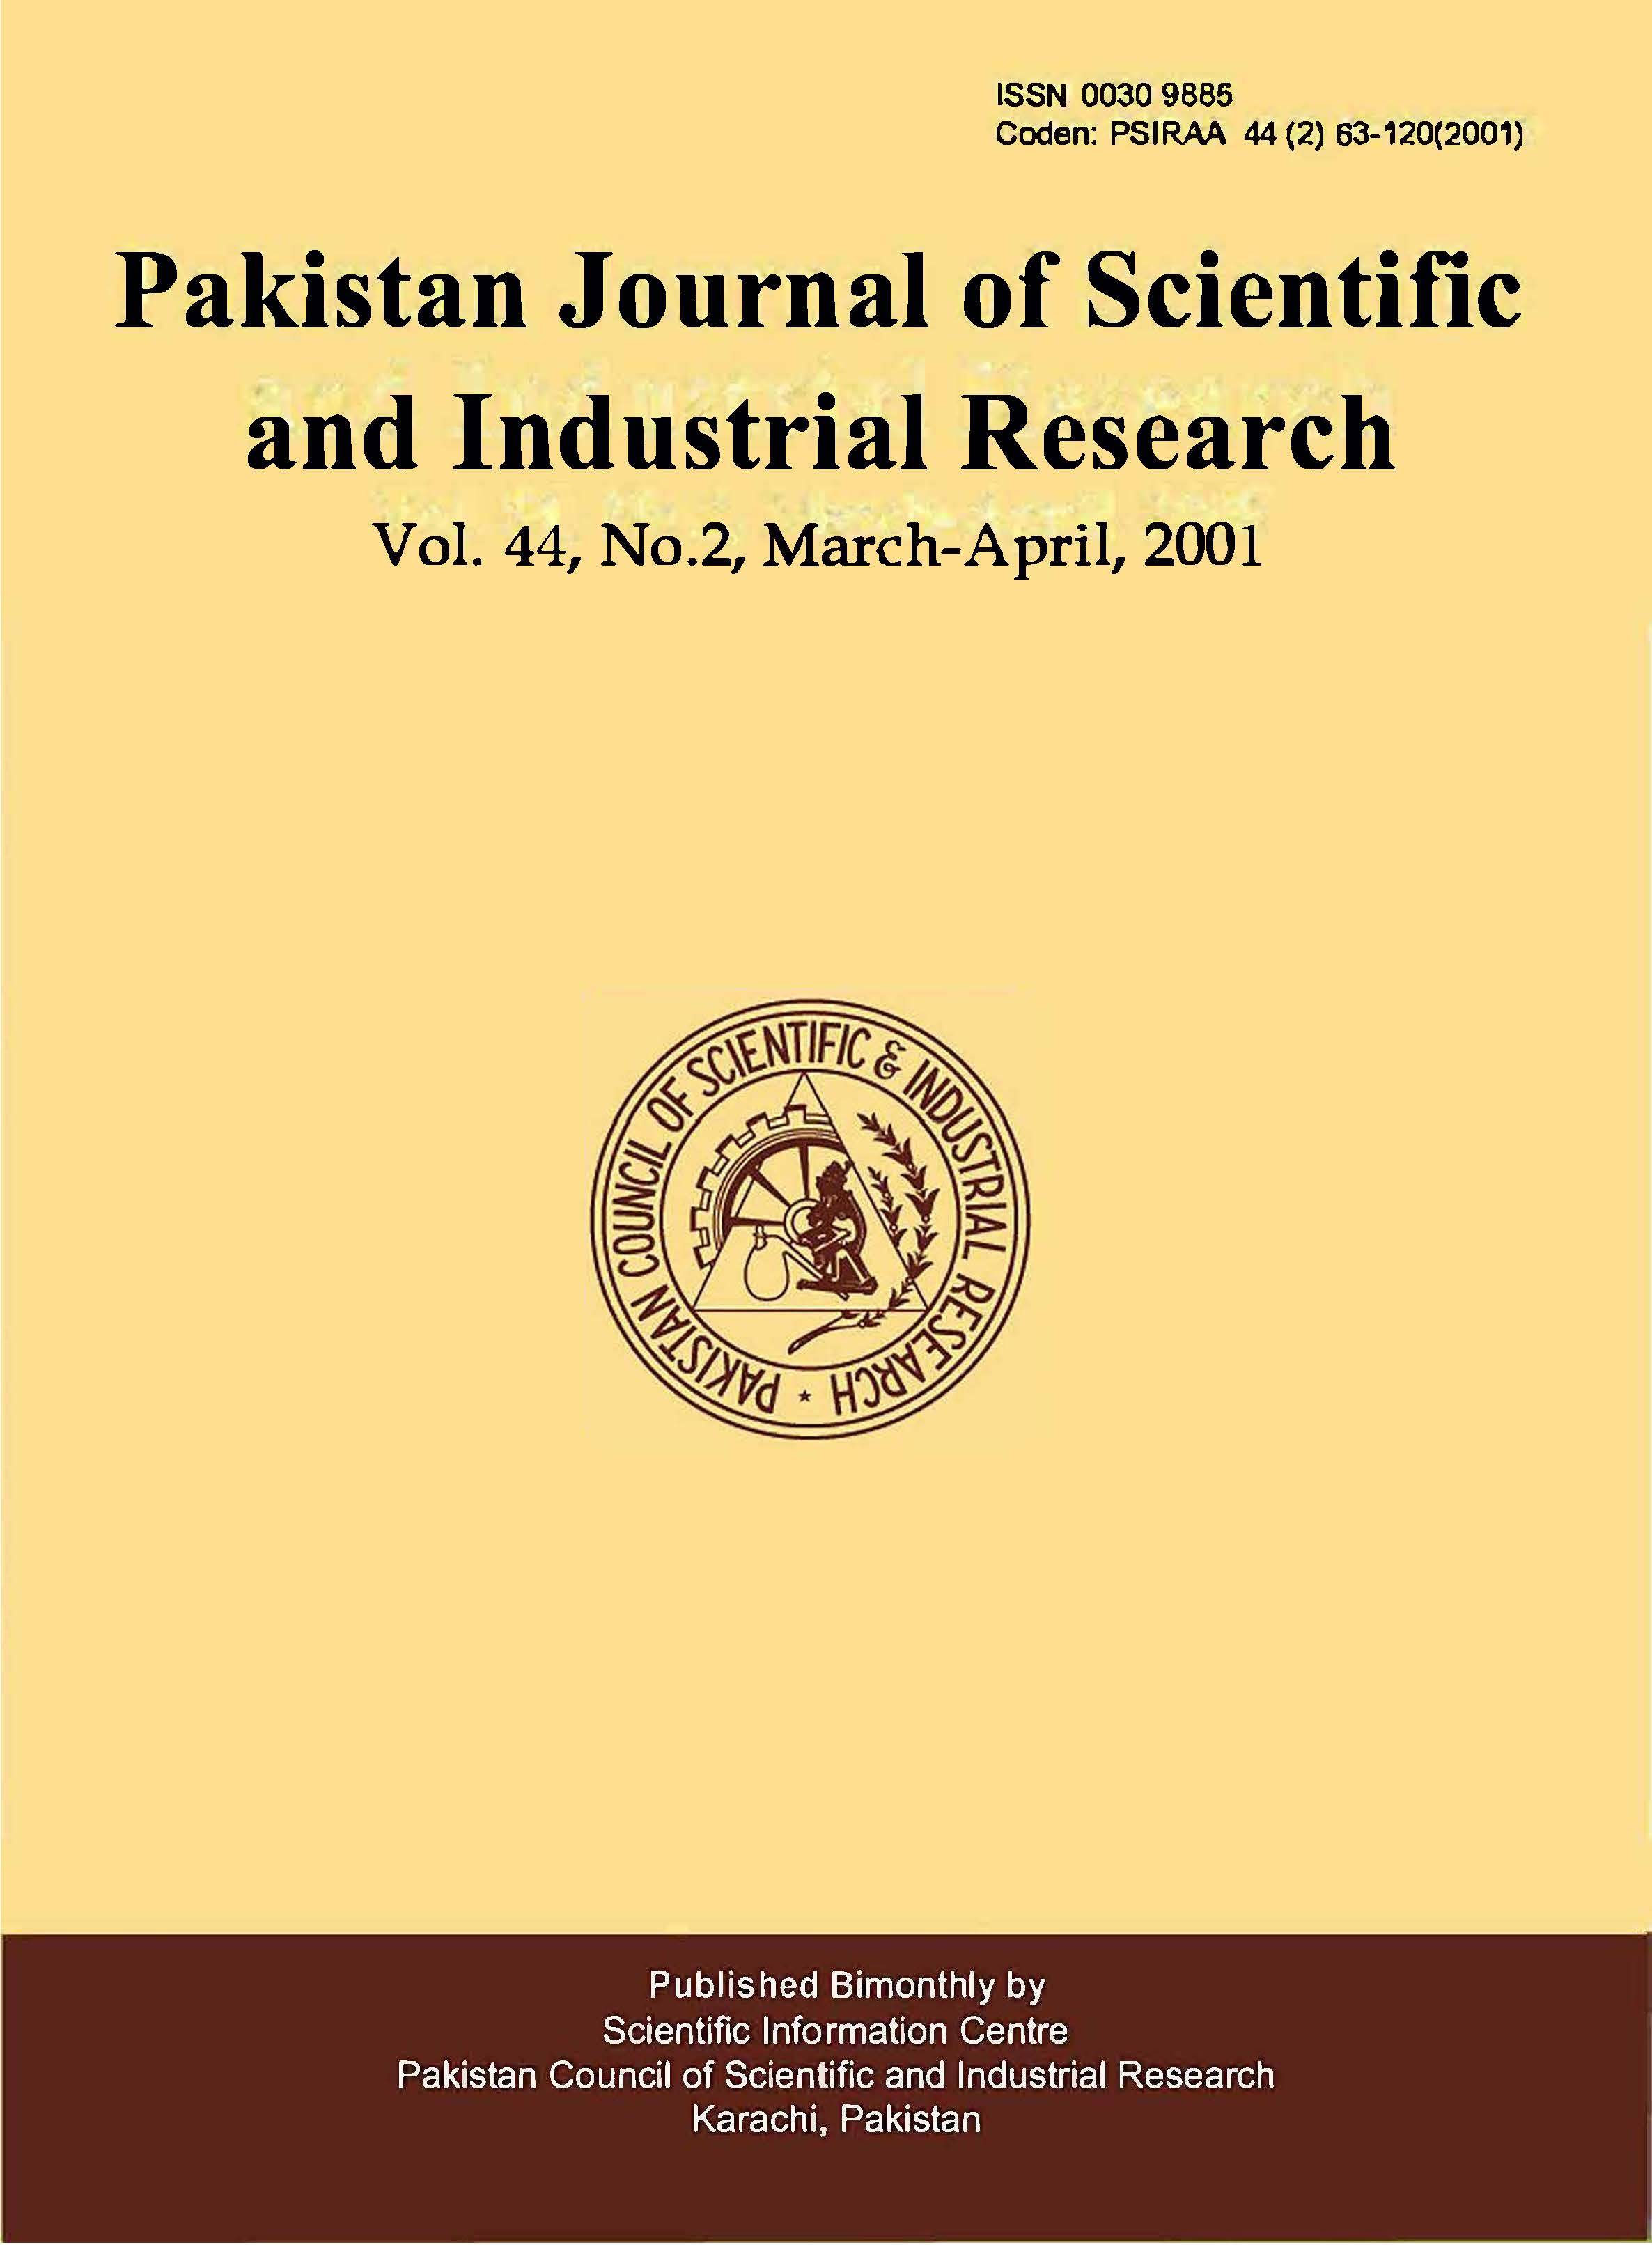 					View Vol. 44 No. 2 (2001): Pakistan Journal of Scientific and Industrial Research
				